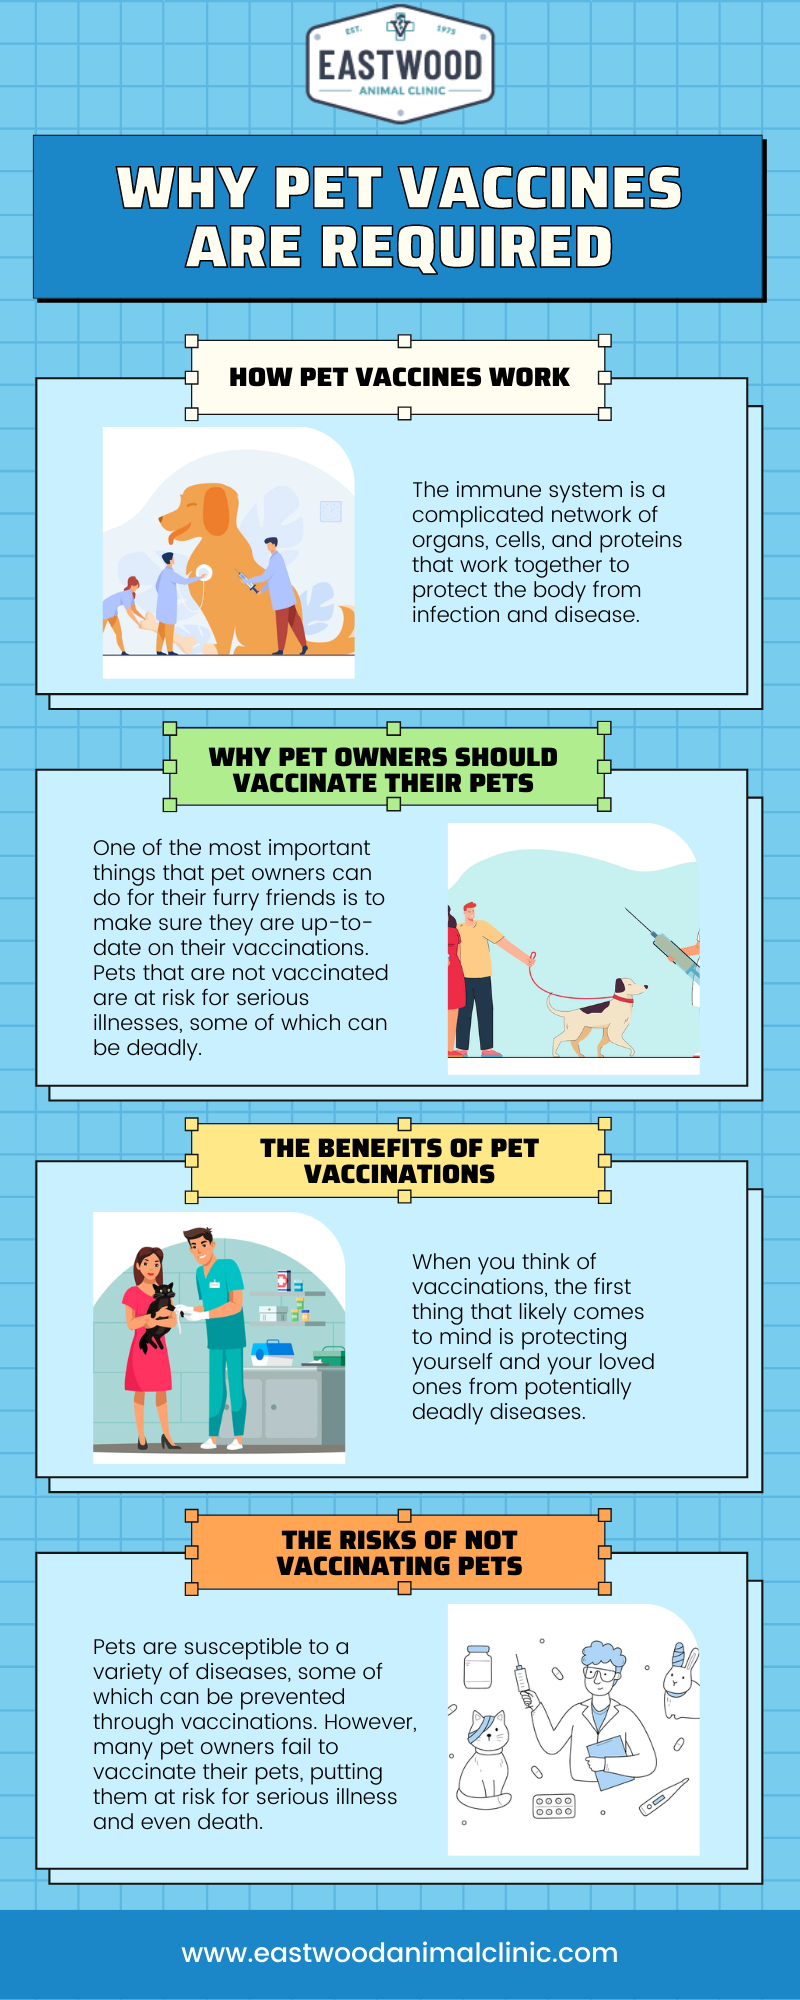 Why Pet Vaccines Are Required